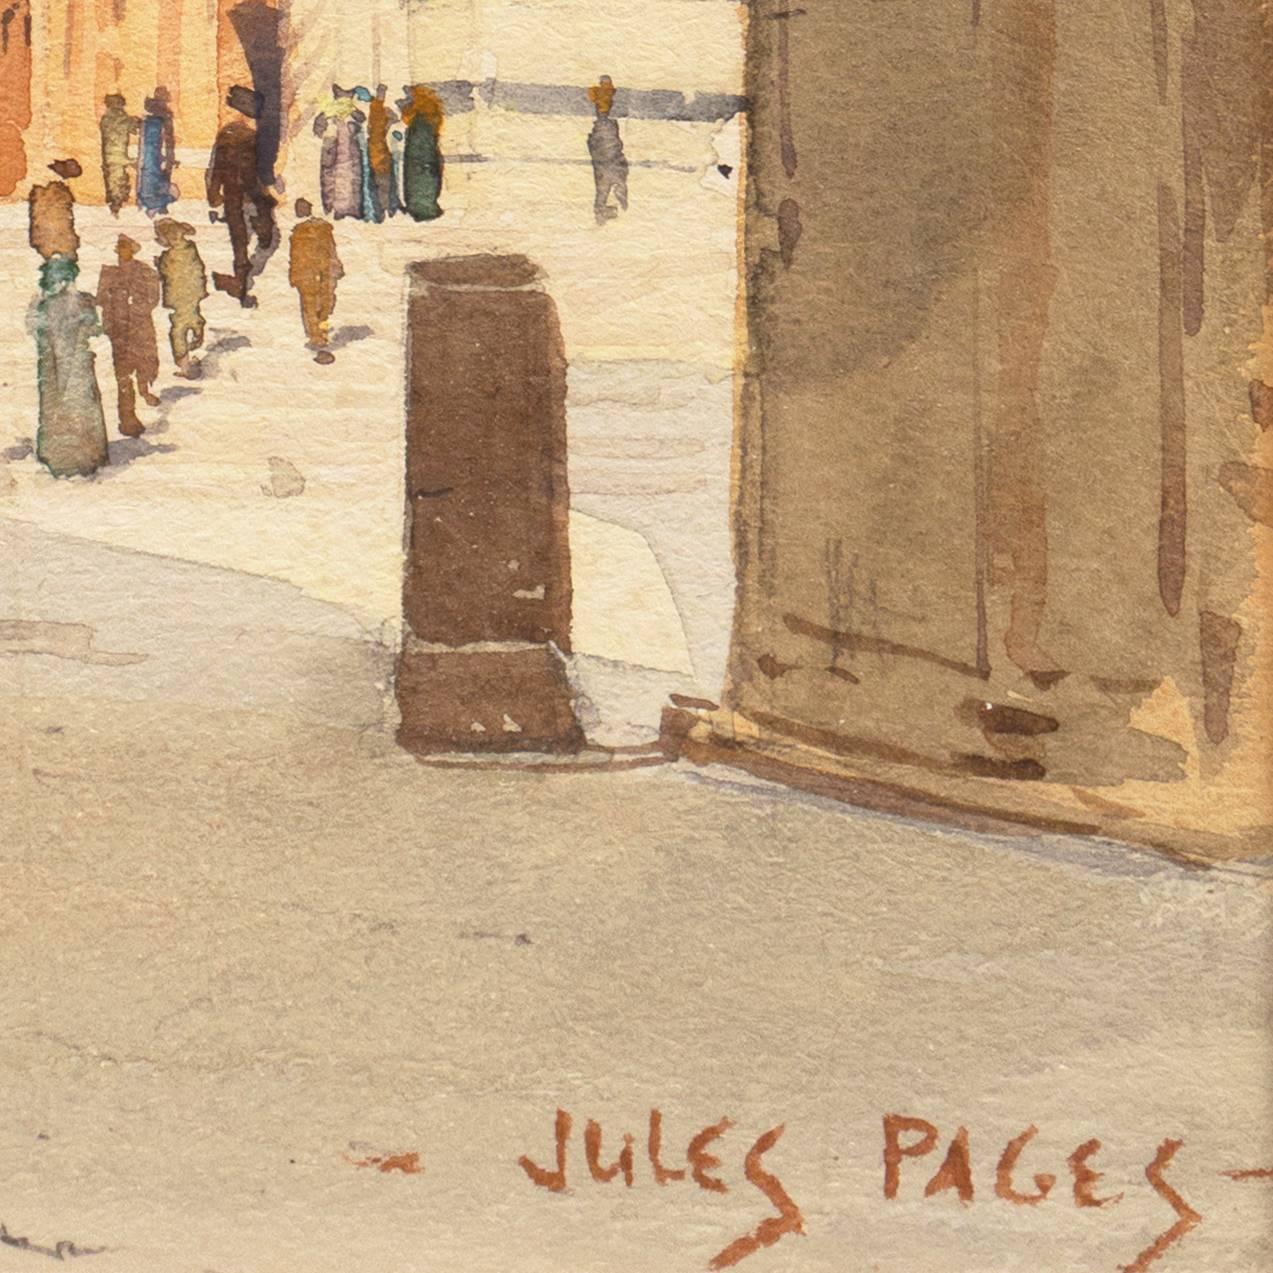 California Impressionist, 'Piazza del Duomo, Siena' - Art by Jules Pages